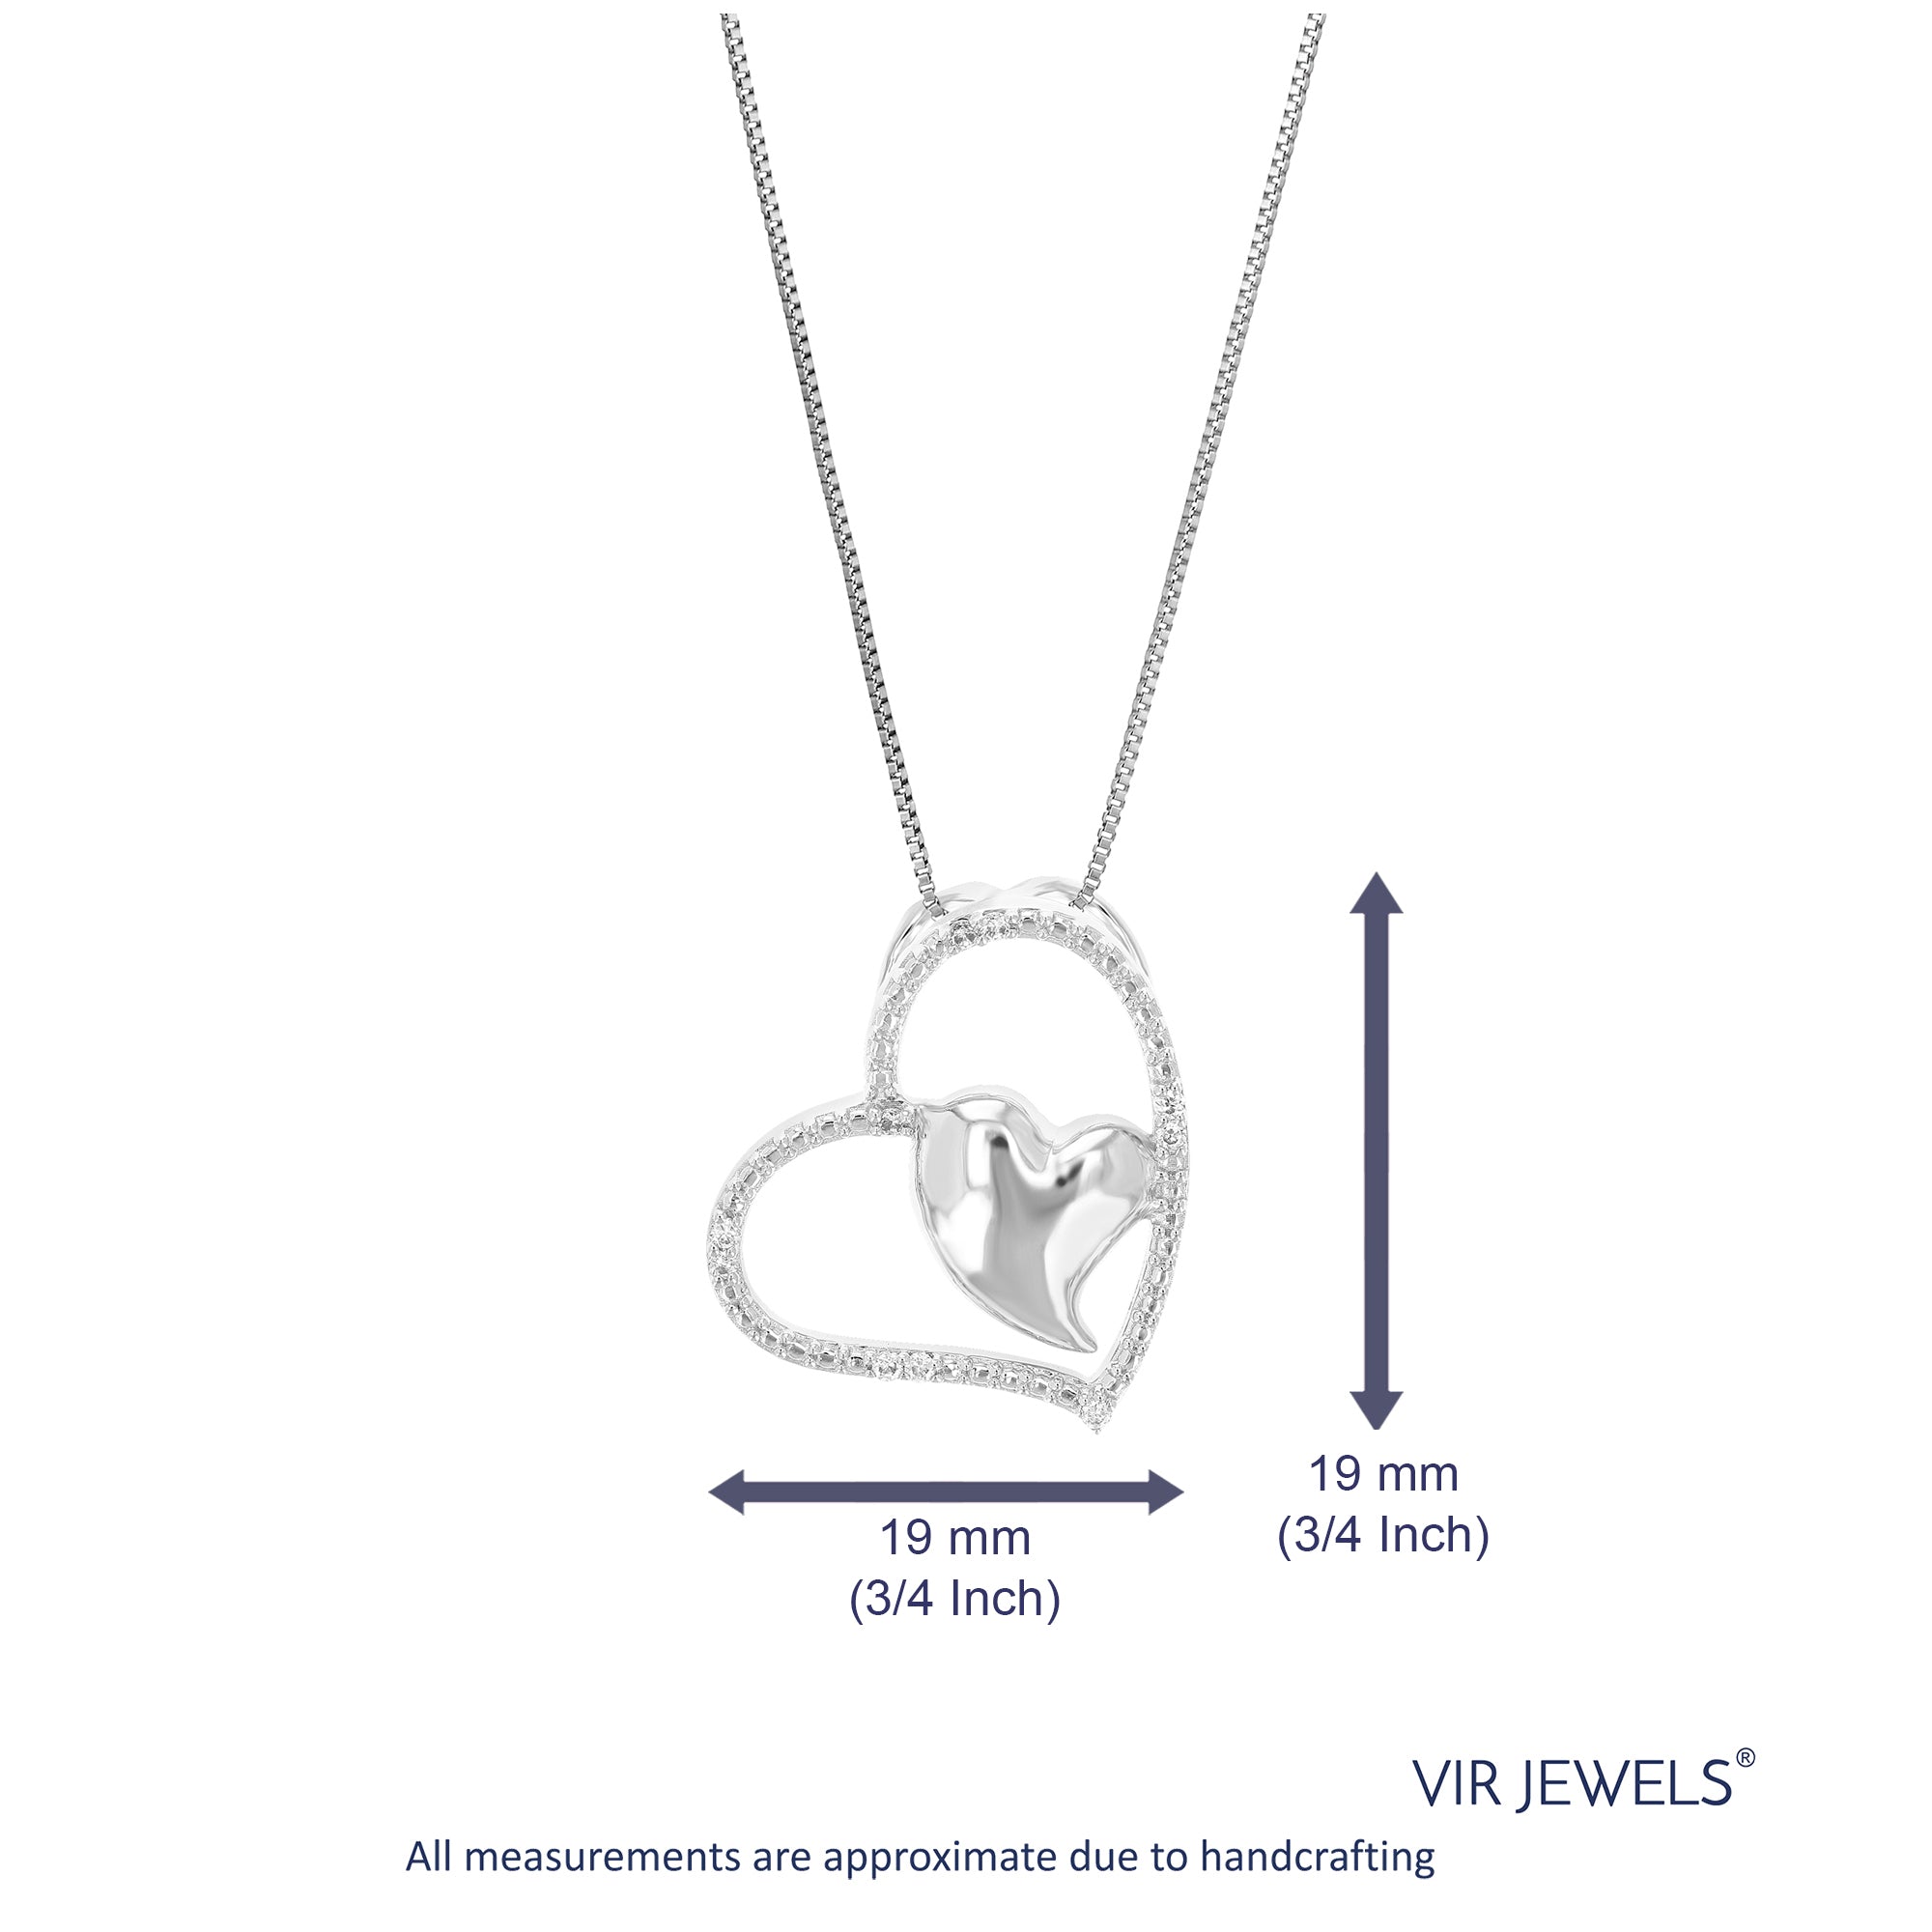 1/14 cttw Diamond Pendant Necklace for Women, Lab Grown Diamond Heart Pendant Necklace in .925 Sterling Silver with Chain, Size 3/4 Inch